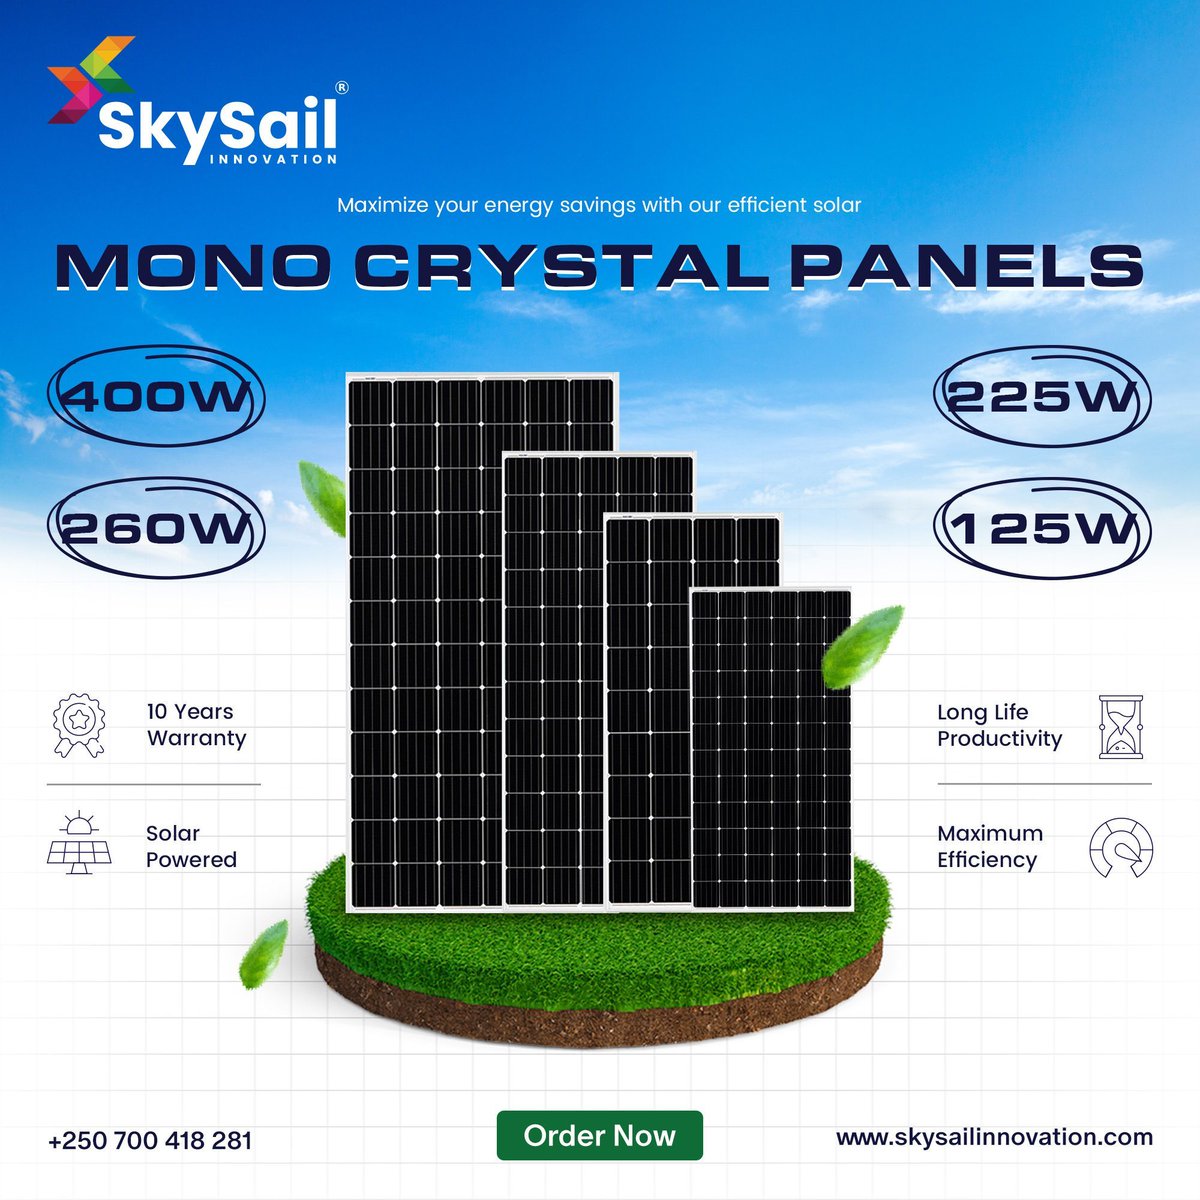 Take your energy savings to the next level with our efficient Mono crystal Solar Panels! ☀️ Whether it's 125W, 225W, 260W, or 400W, SkySail Innovation has you covered. Say hello to sustainable living and goodbye to hefty bills! #SkySailInnovation #SolarPower #EnergyEfficiency